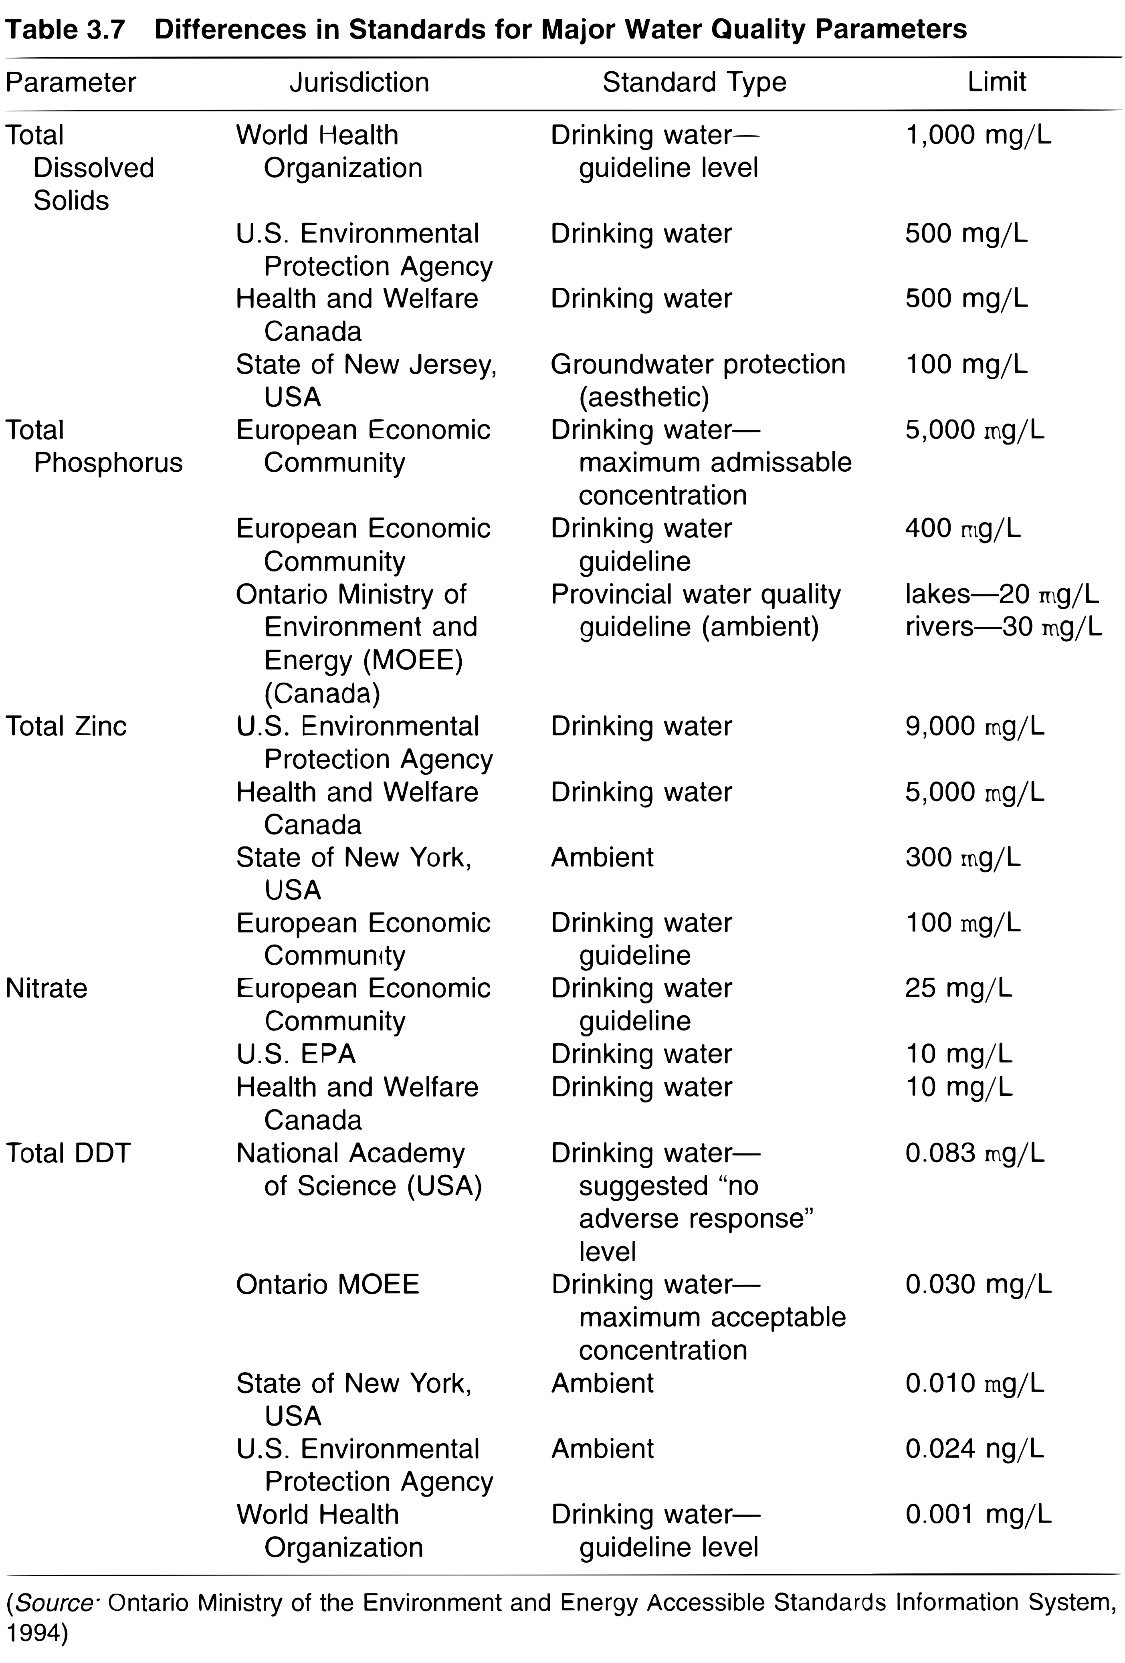 Differences in Standards for Major Water Quality Parameters.jpeg